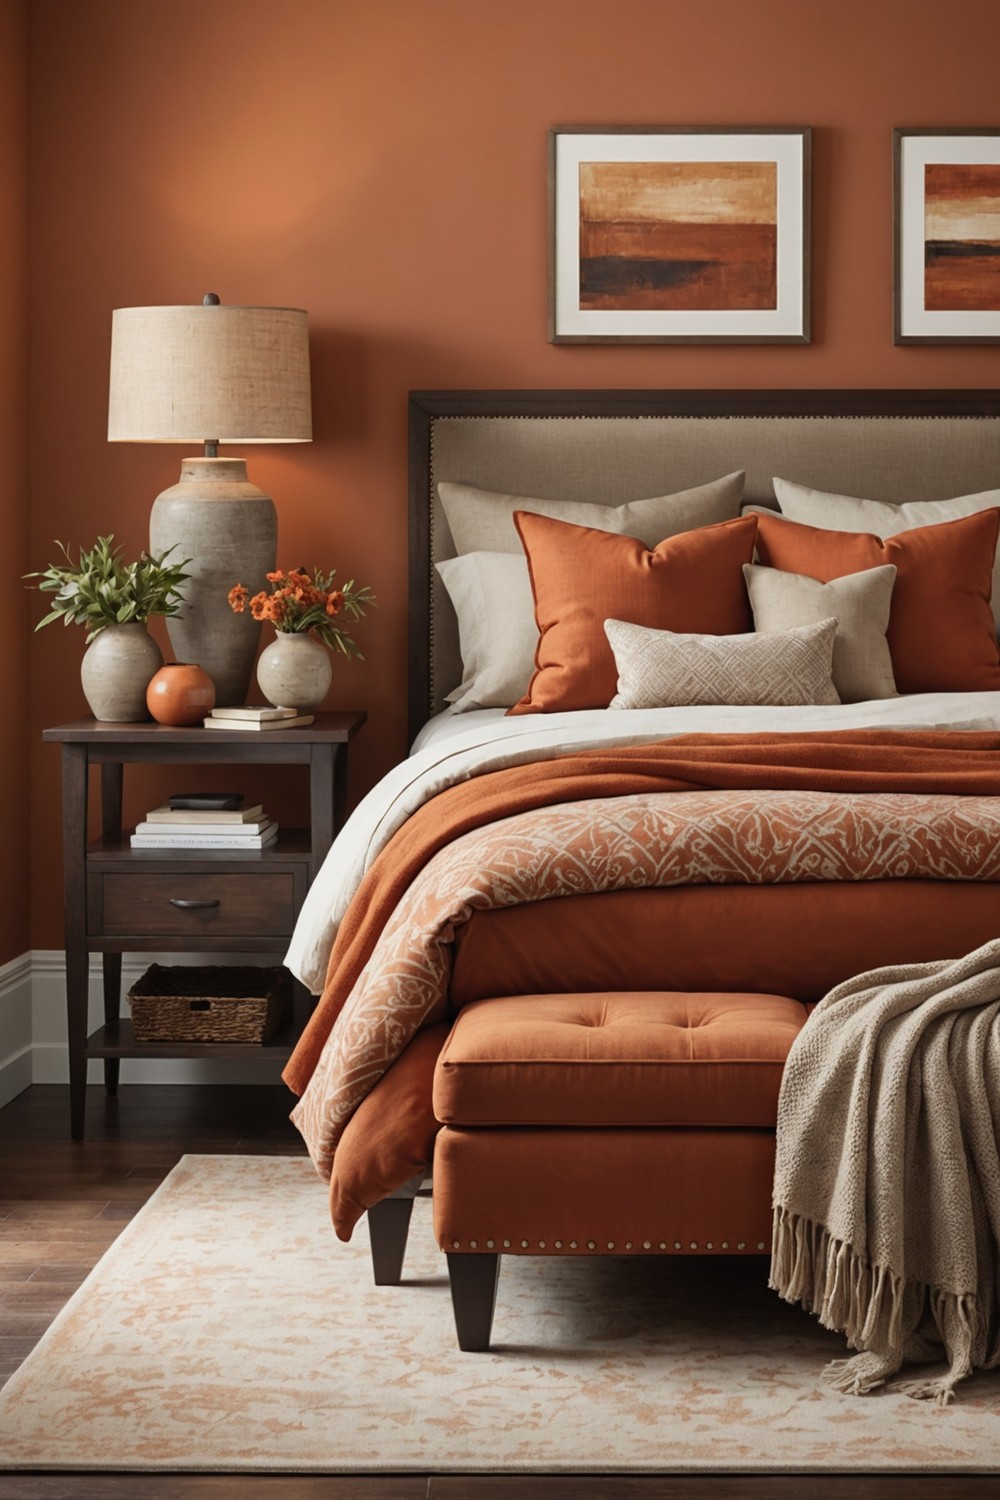 Terracotta-Inspired Fabric Patterns for Upholstery